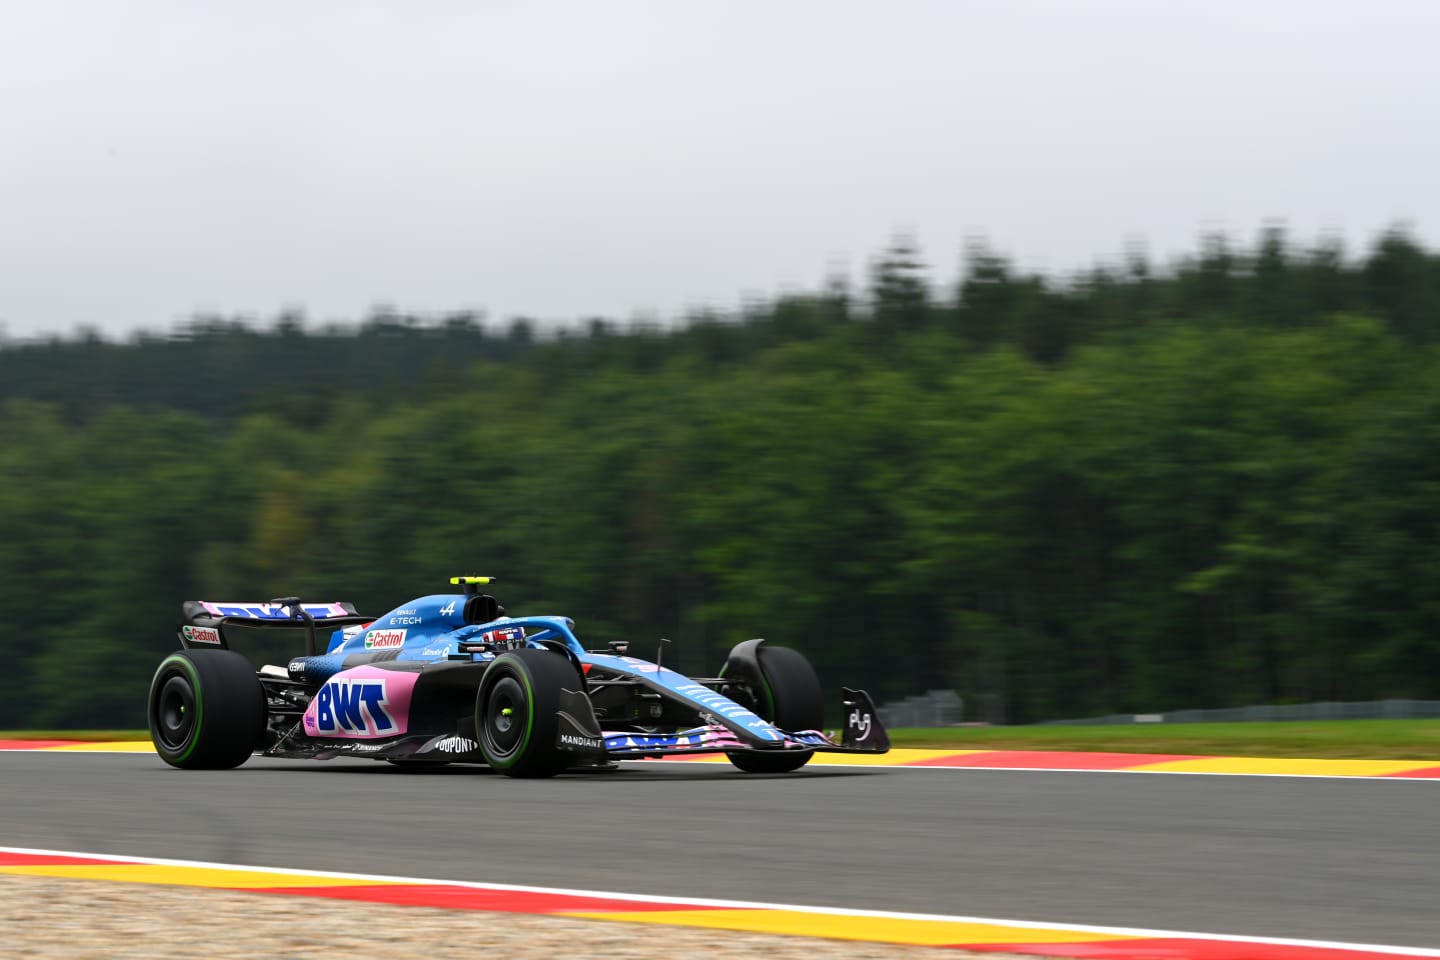 SPA, BELGIUM - AUGUST 26: Esteban Ocon of France driving the (31) Alpine F1 A522 Renault on track during practice ahead of the F1 Grand Prix of Belgium at Circuit de Spa-Francorchamps on August 26, 2022 in Spa, Belgium. (Photo by Dan Mullan/Getty Images)